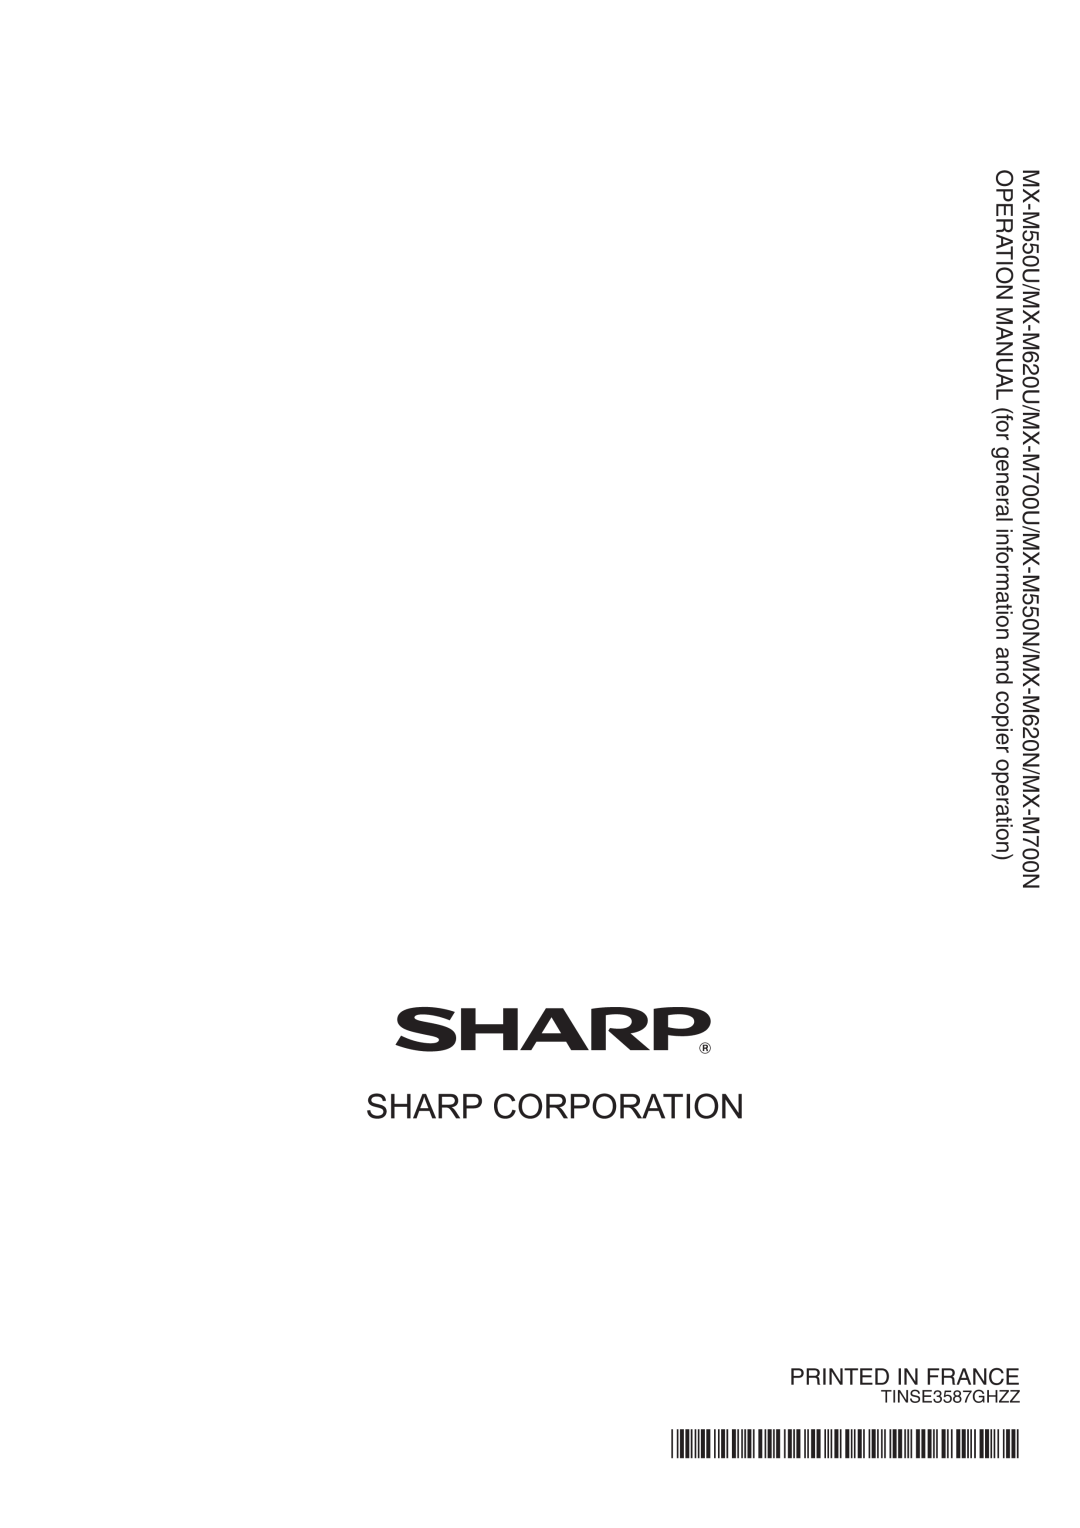 Sharp MX-M620N, MX-M700N, MX-M550U, MX-M700U, MX-M550N, MX-M620U specifications PRINTED IN FRANCE TINSE3587GHZZ 